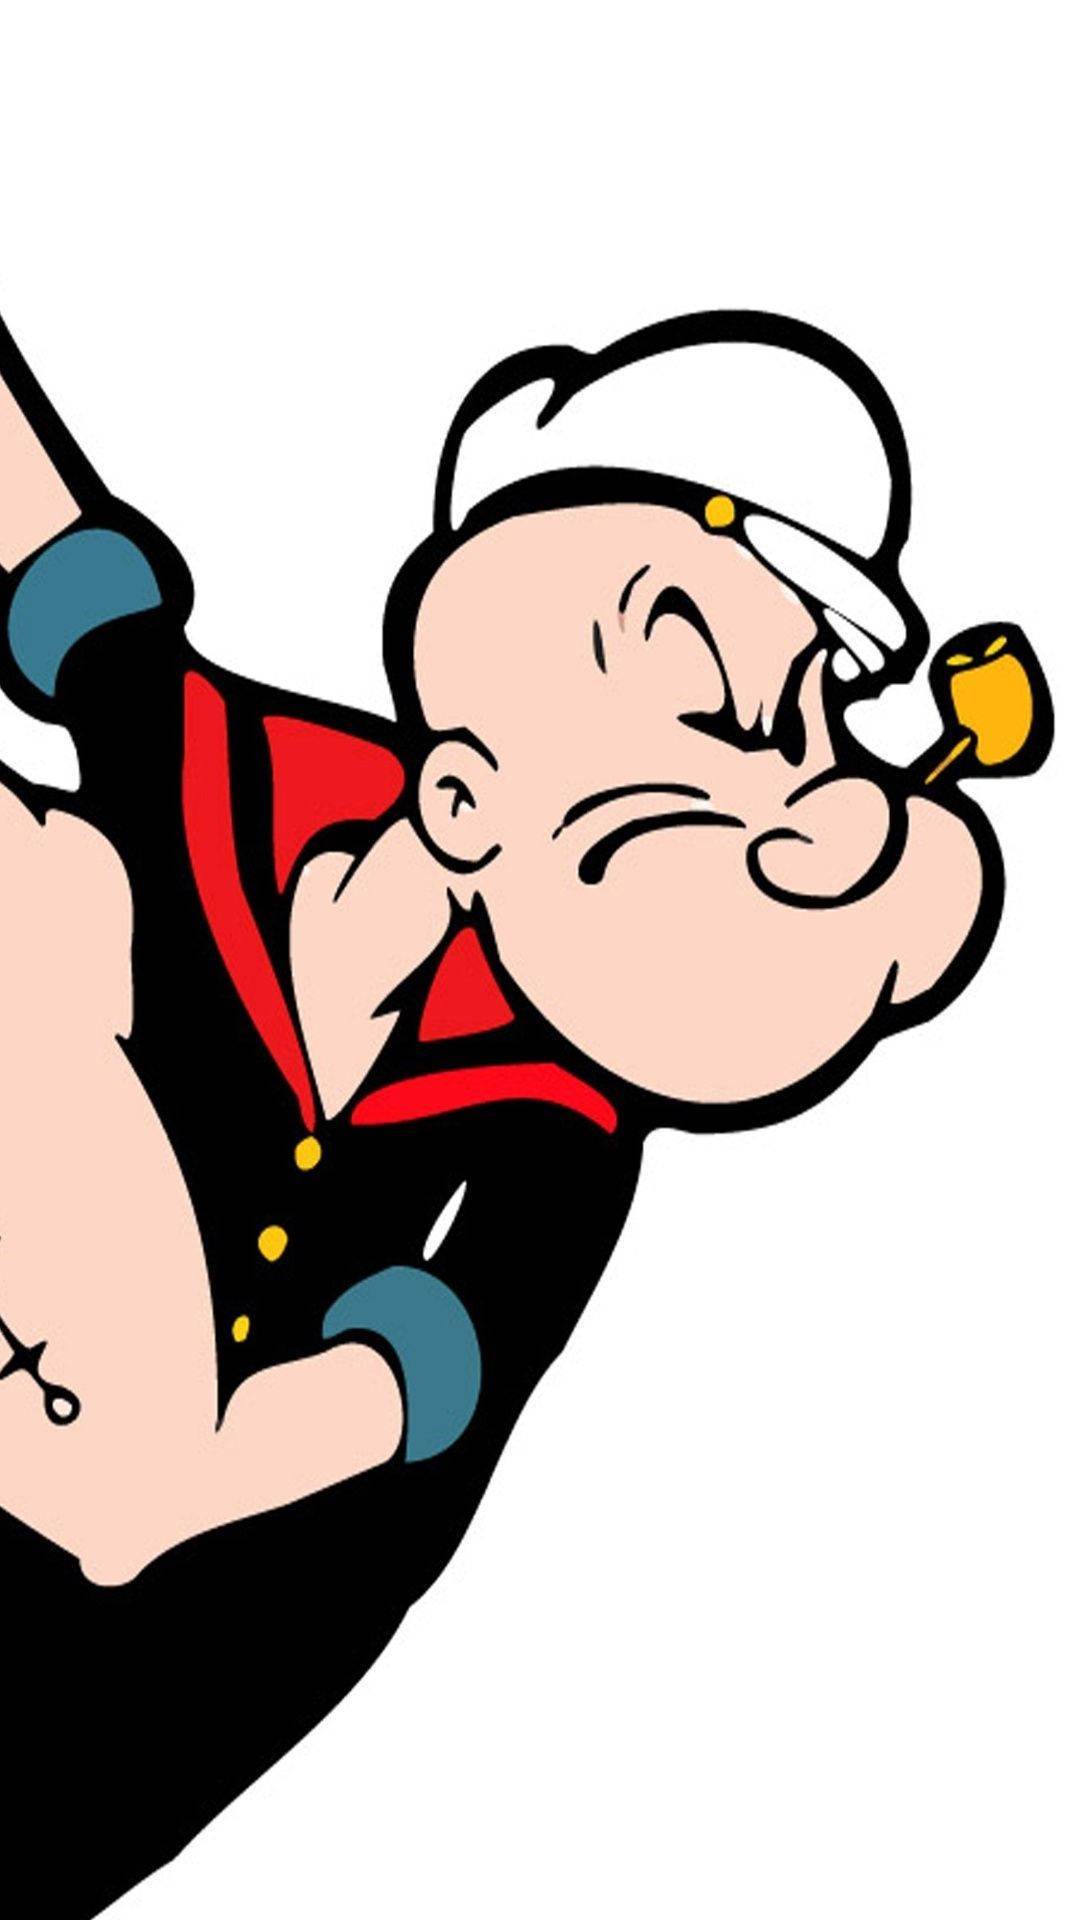 Popeye On The Side